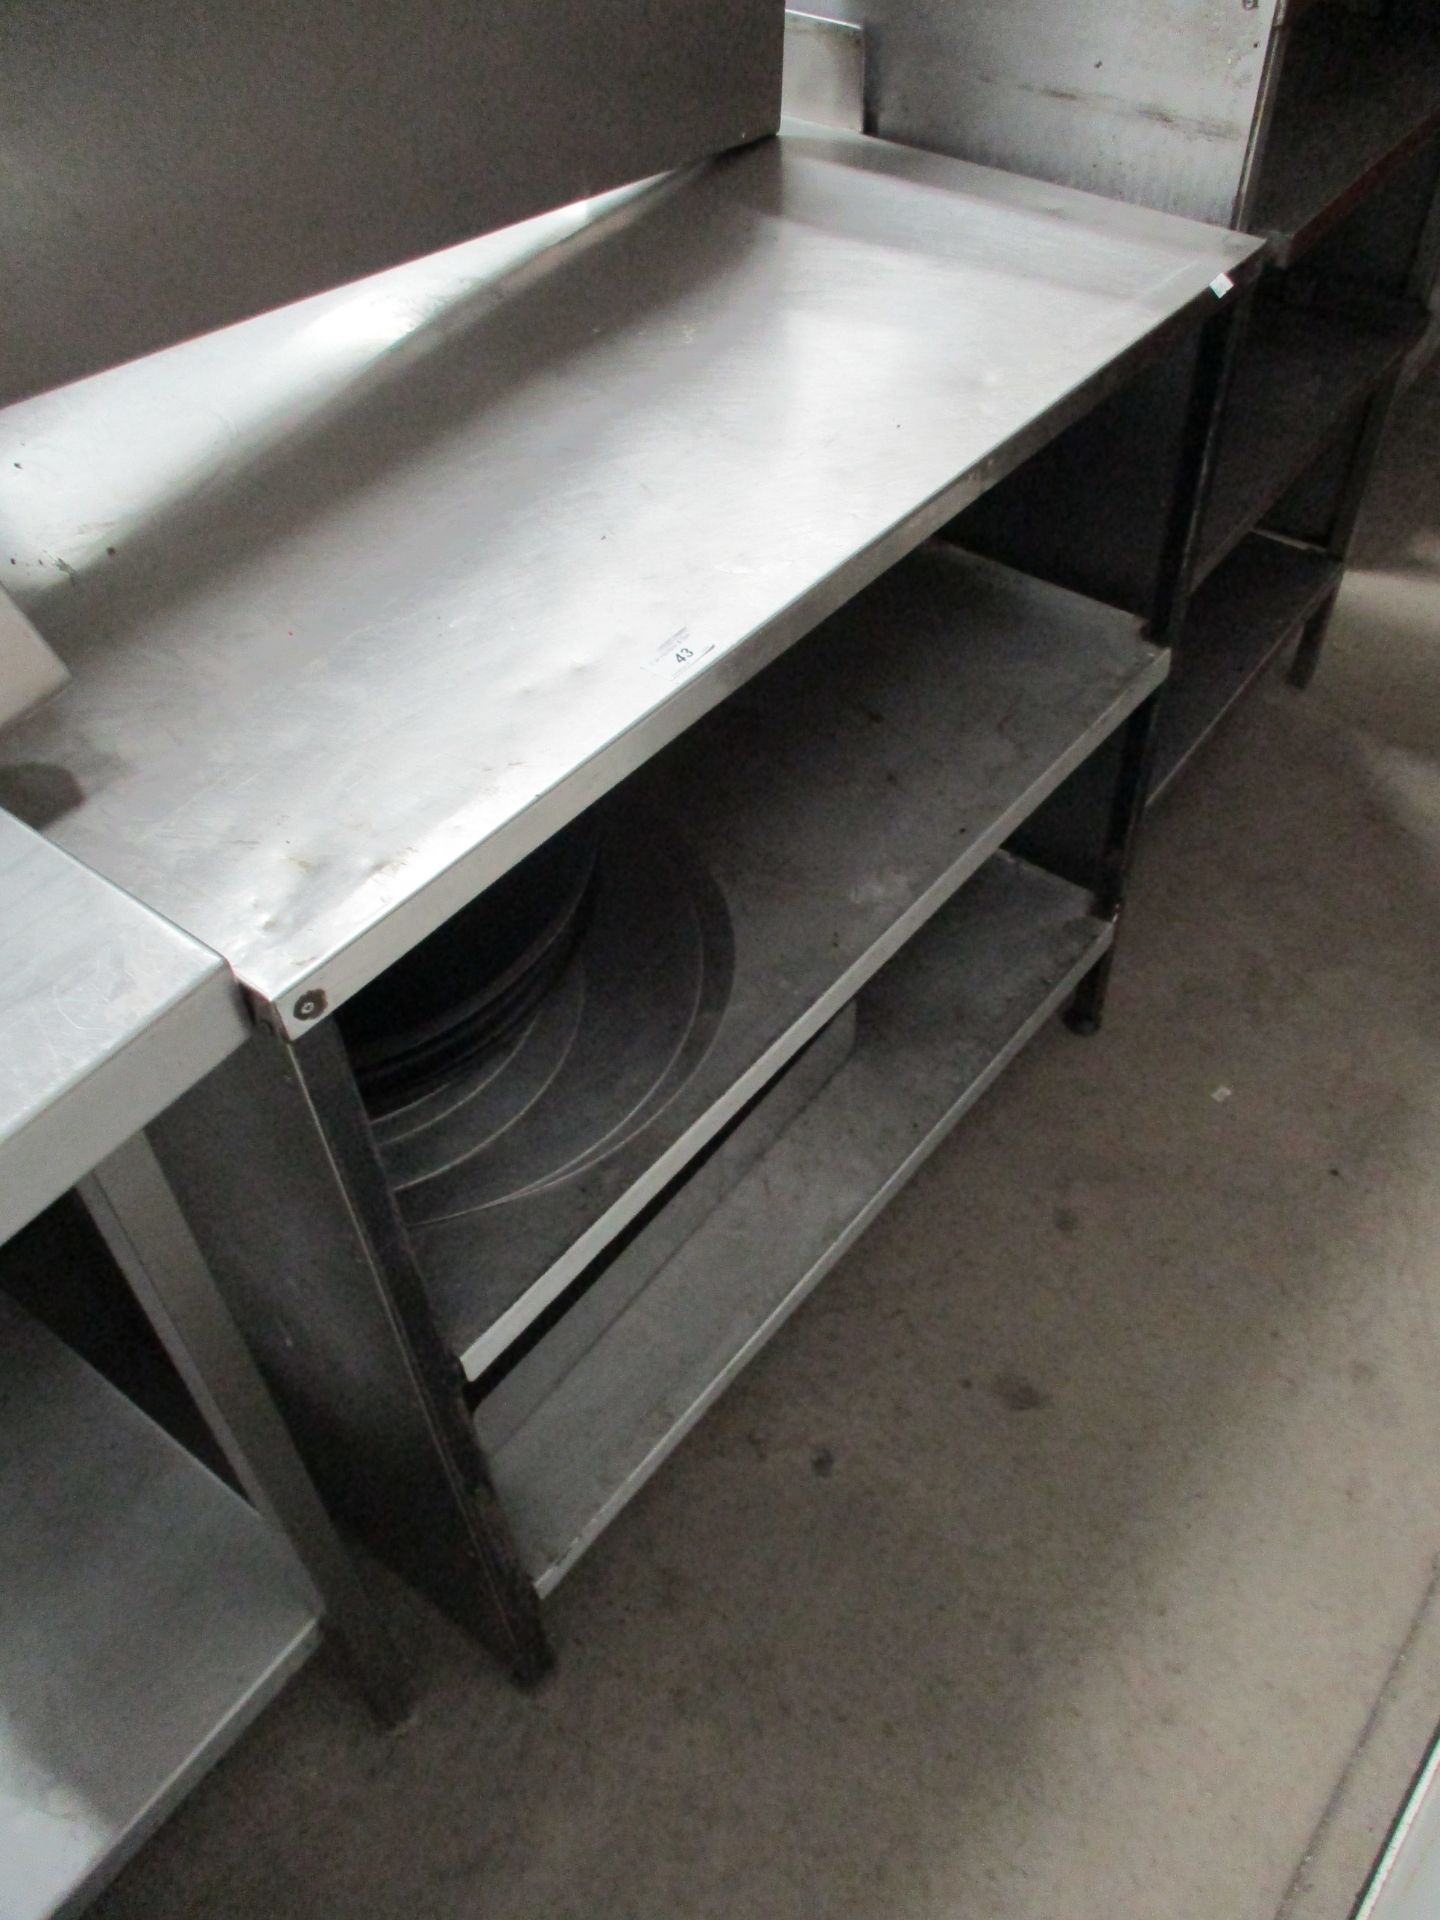 A stainless steel three shelf preparation table 60 x 90cm complete with a quantity of baking trays